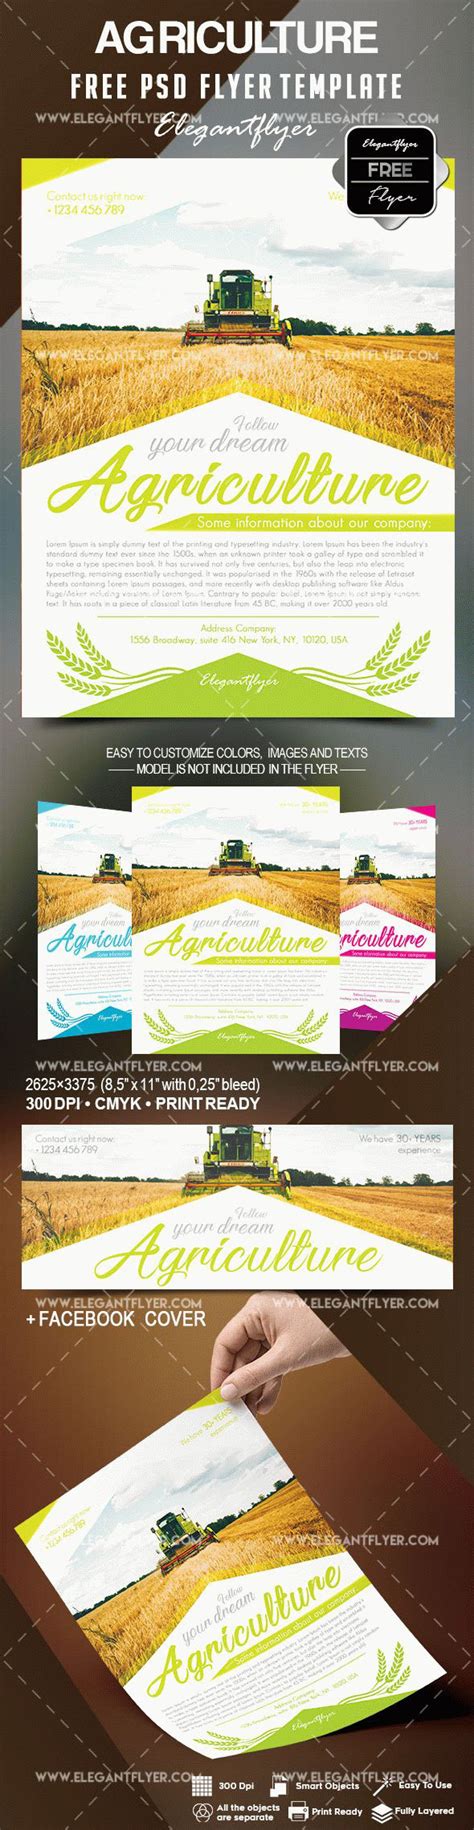 Free Agriculture Flyer Templates On Behance